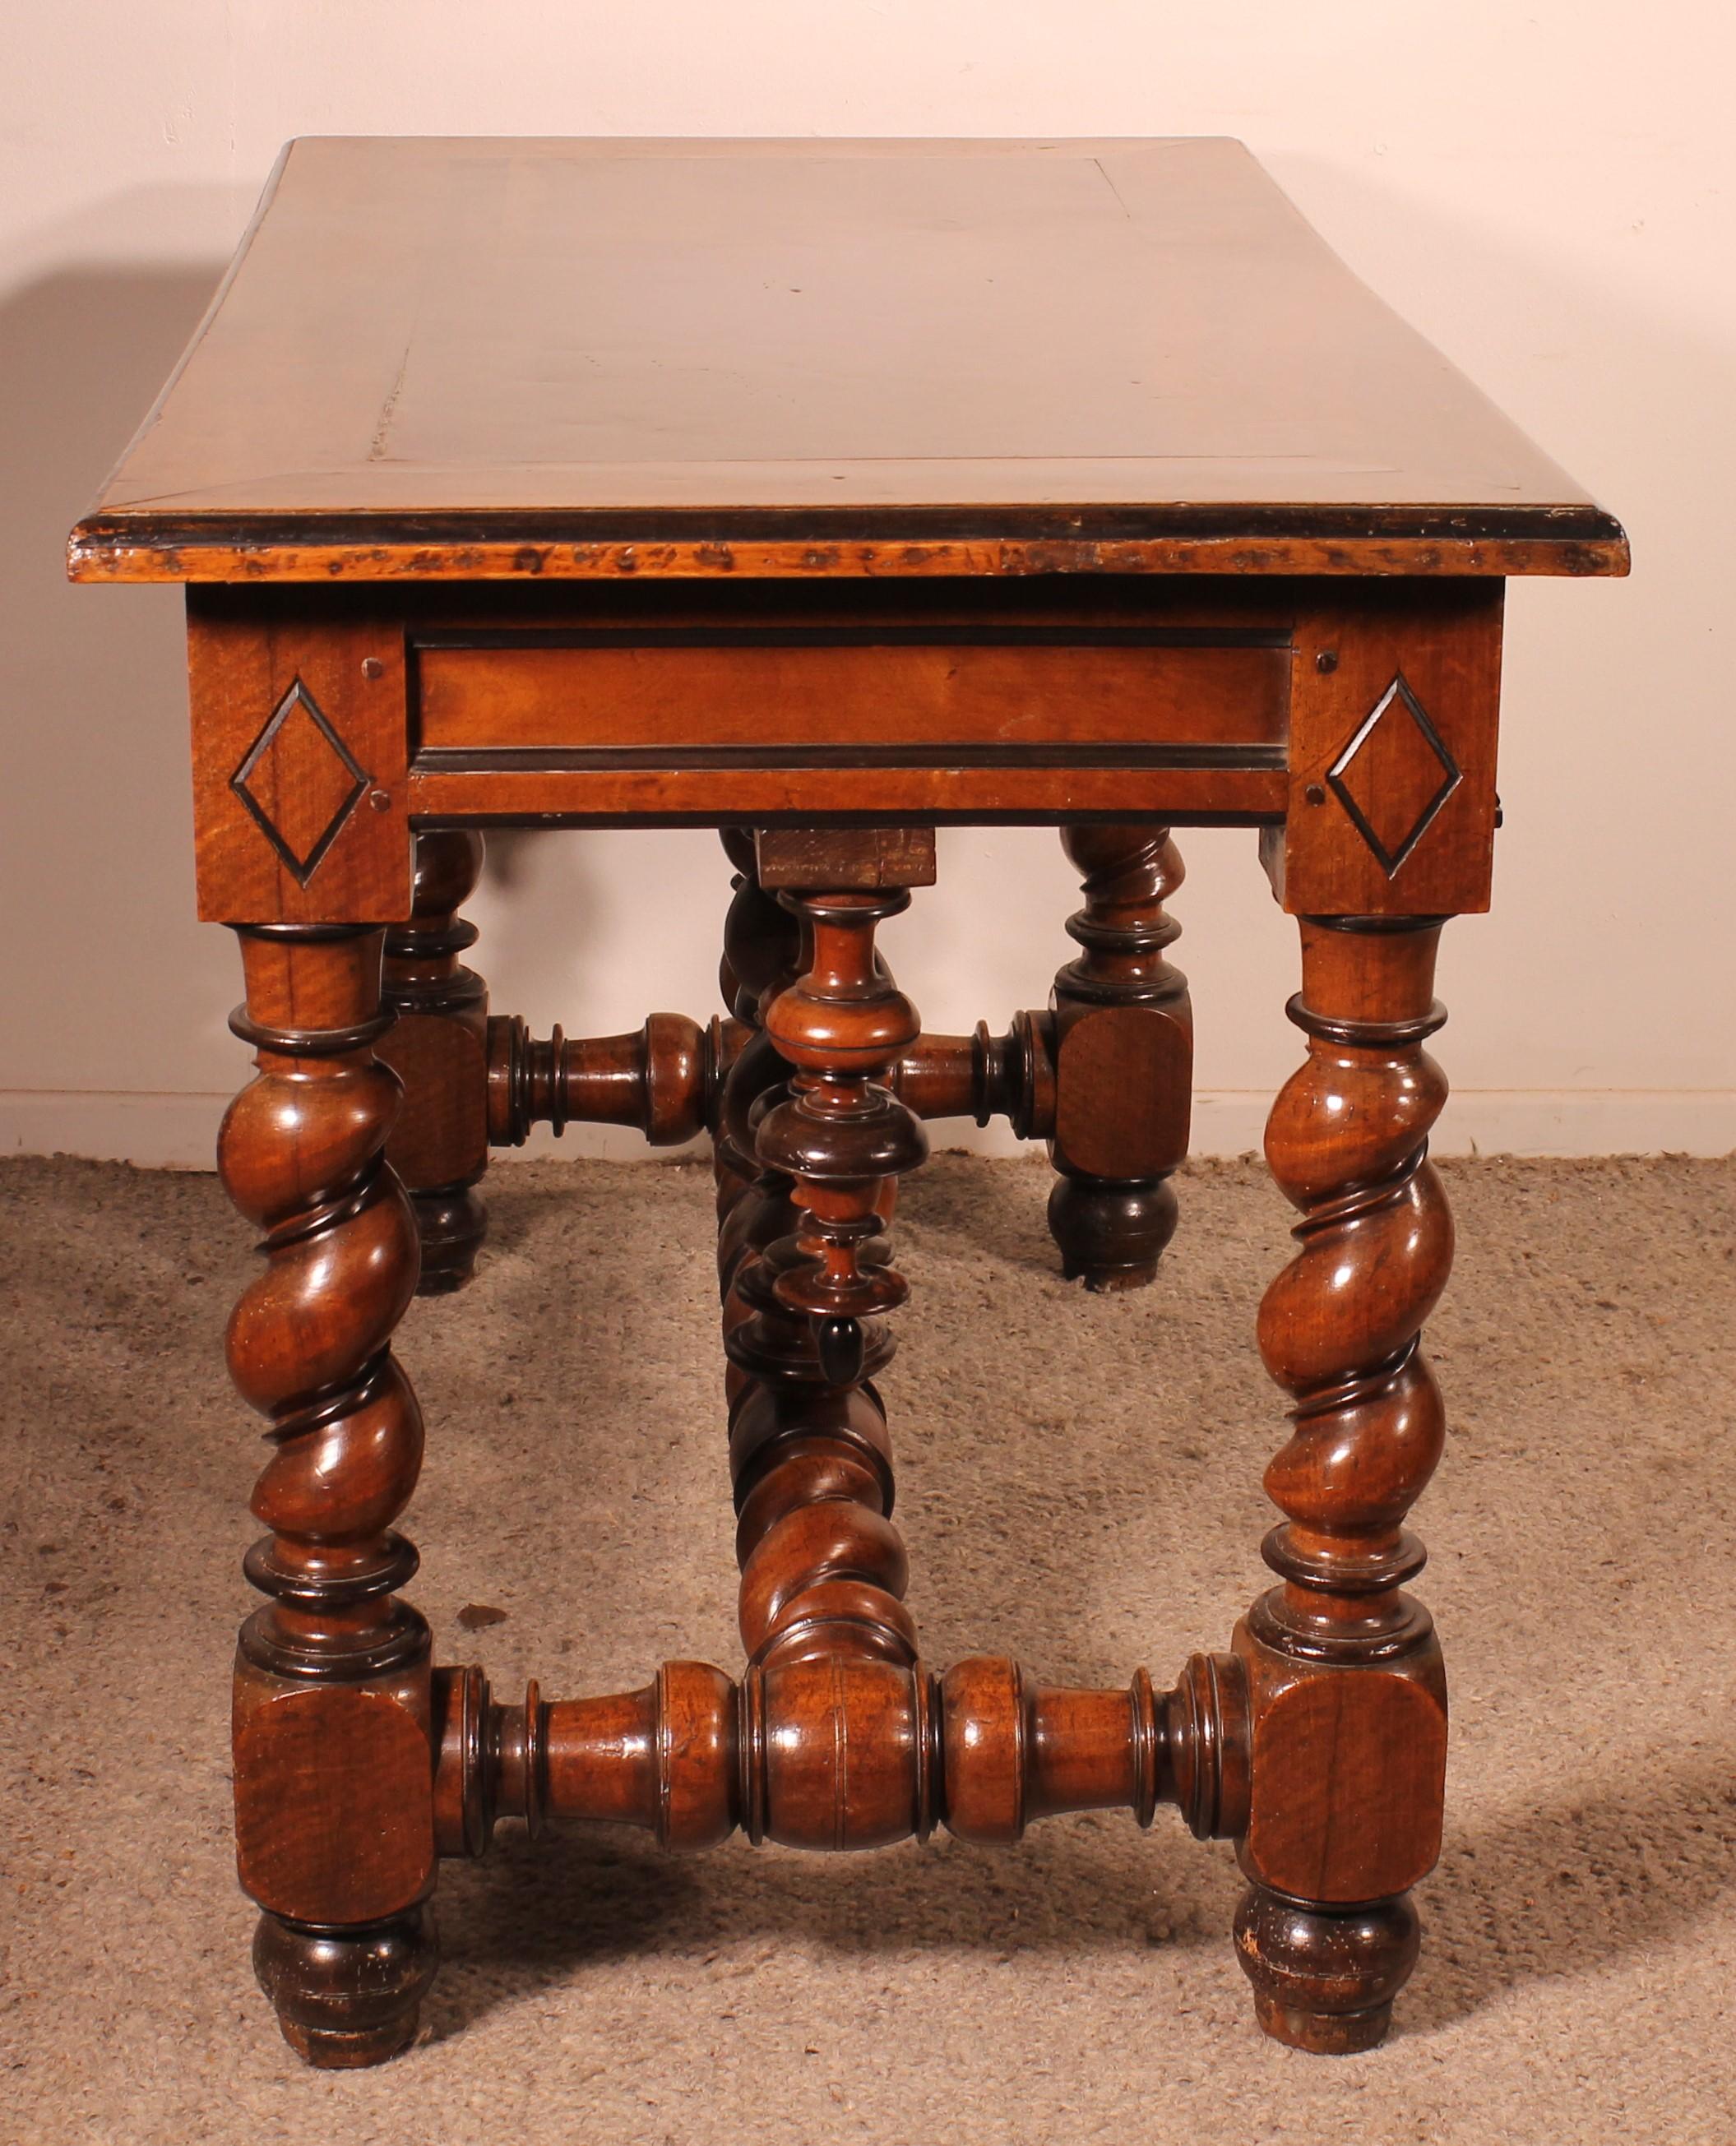 Louis XIII Period Center Table Or Console In Walnut -early 17 Century For Sale 3